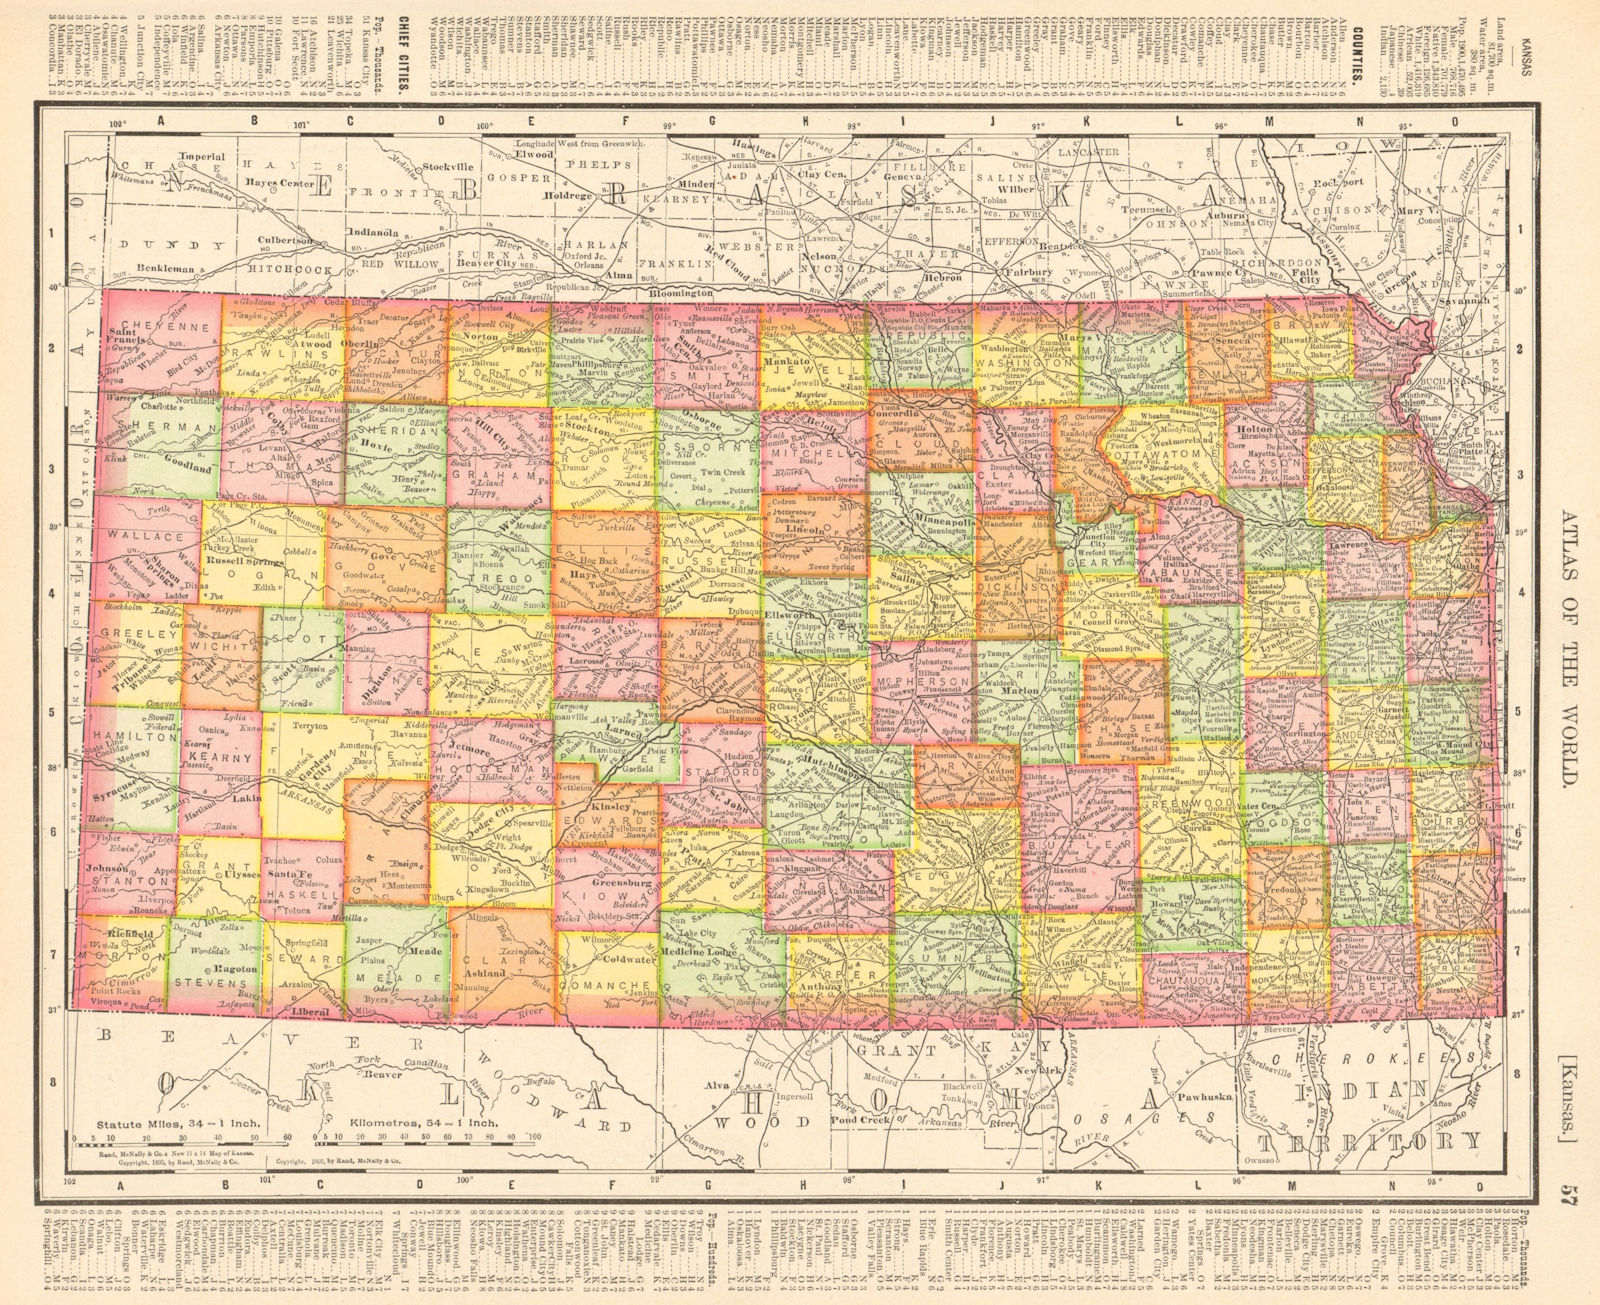 Kansas state map showing counties. RAND MCNALLY 1906 old antique chart